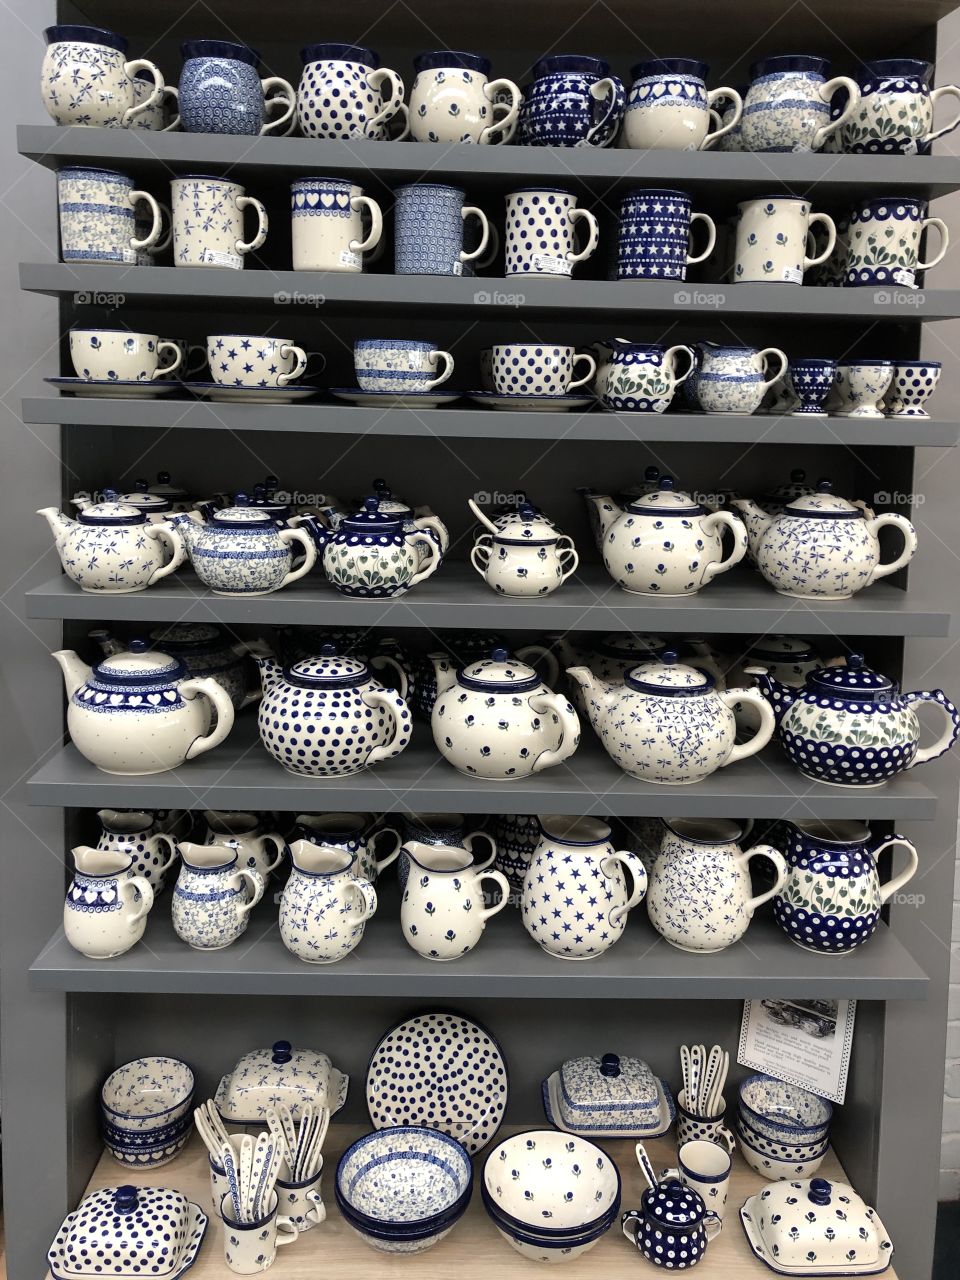 A fine display of kitchenware, for those of us who want high quality homeware.